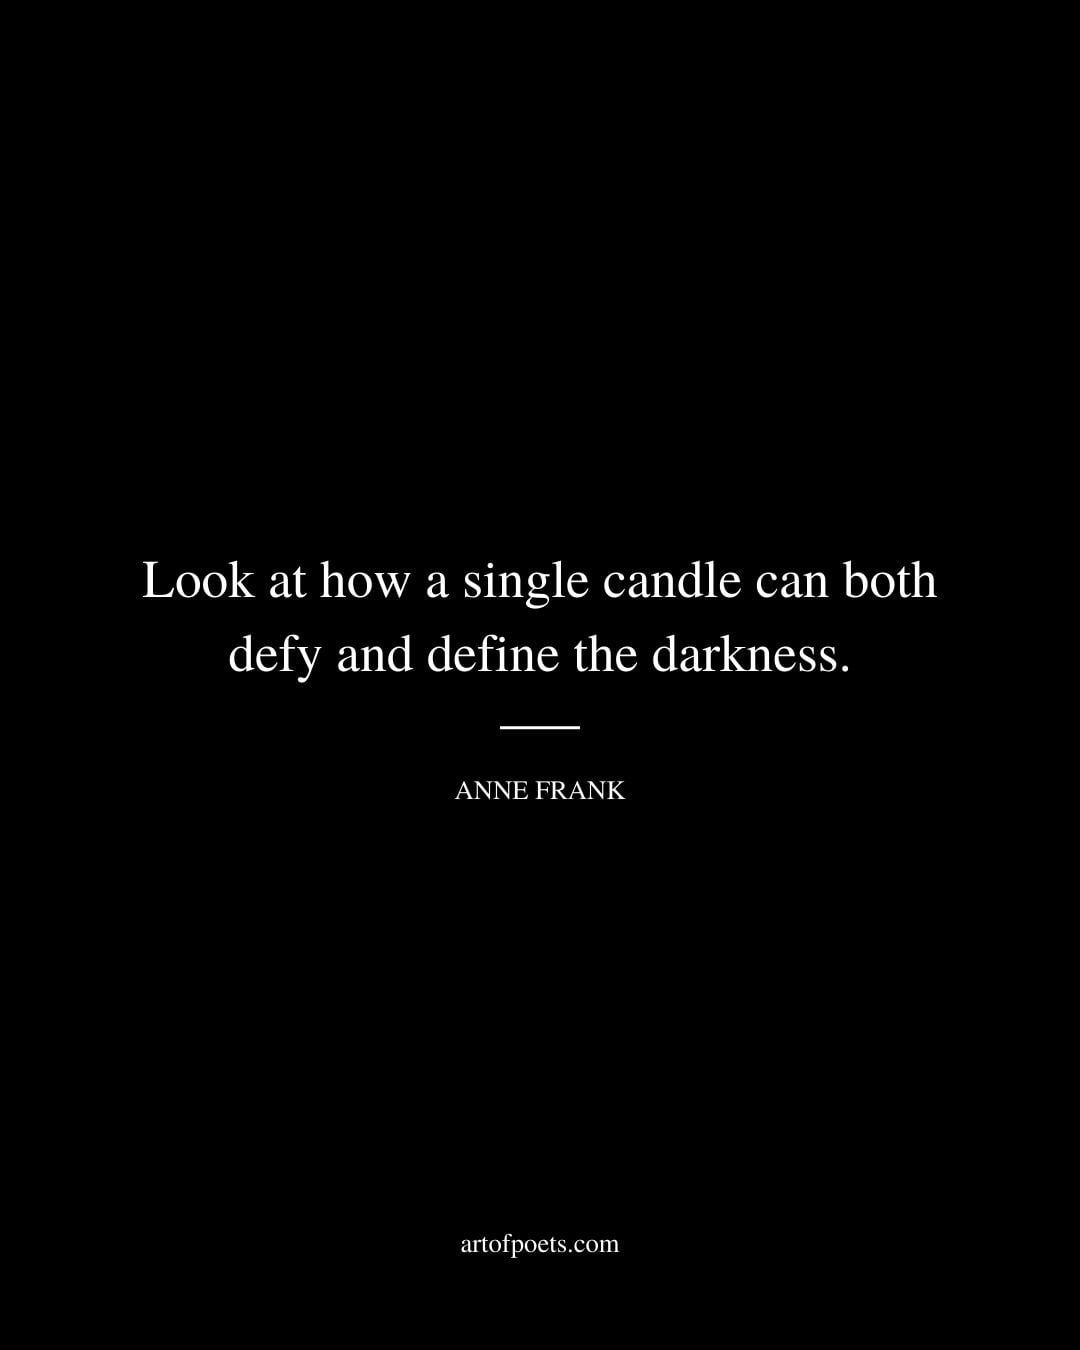 Look at how a single candle can both defy and define the darkness. Anne Frank